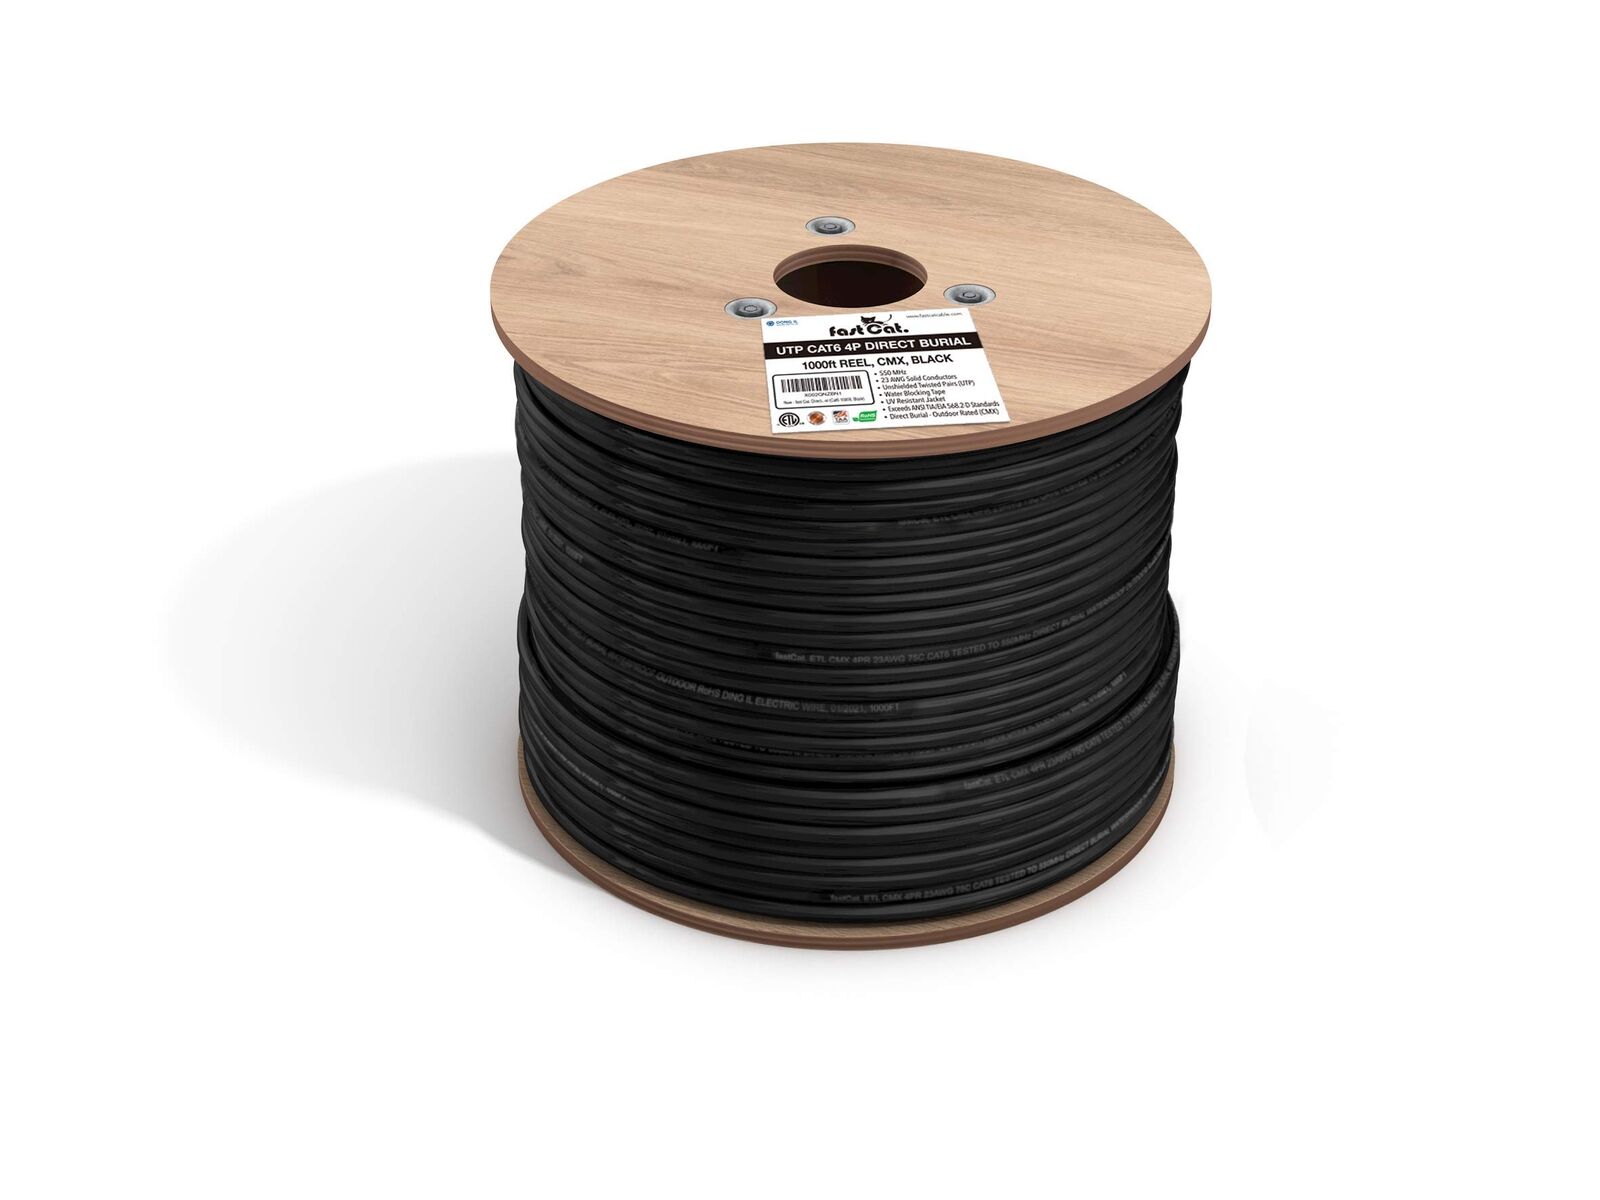 fast Cat. Cat6 Direct Burial Outdoor Ethernet Cable - 1000Ft Waterproof Cat6 ...